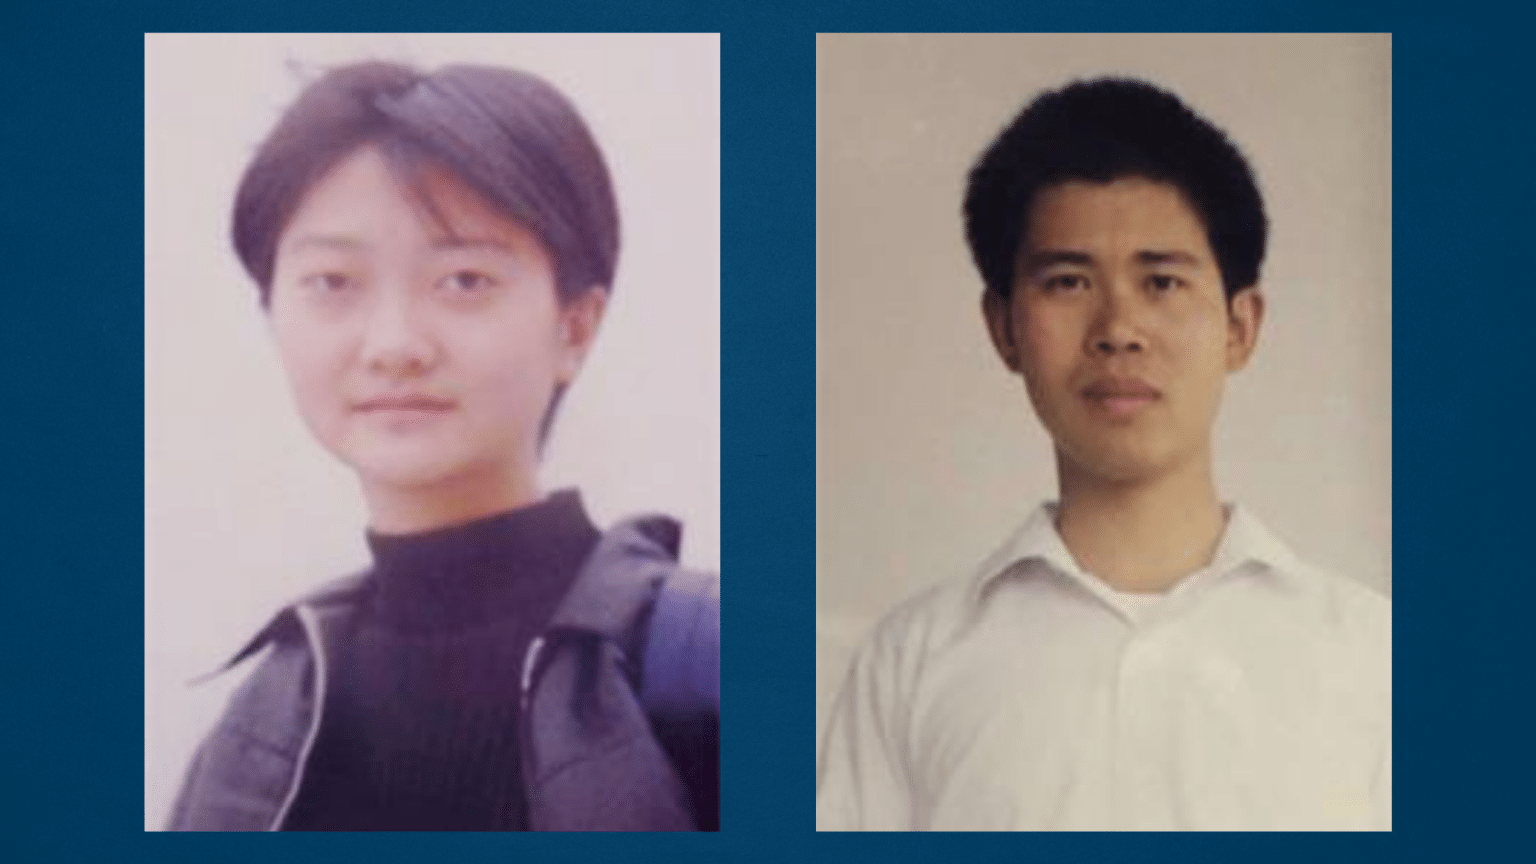 Ms. Zhang Yibo (left) and Mr. He Binggang (right) were sentenced for their alleged involvement in the circumvention tool oGate.